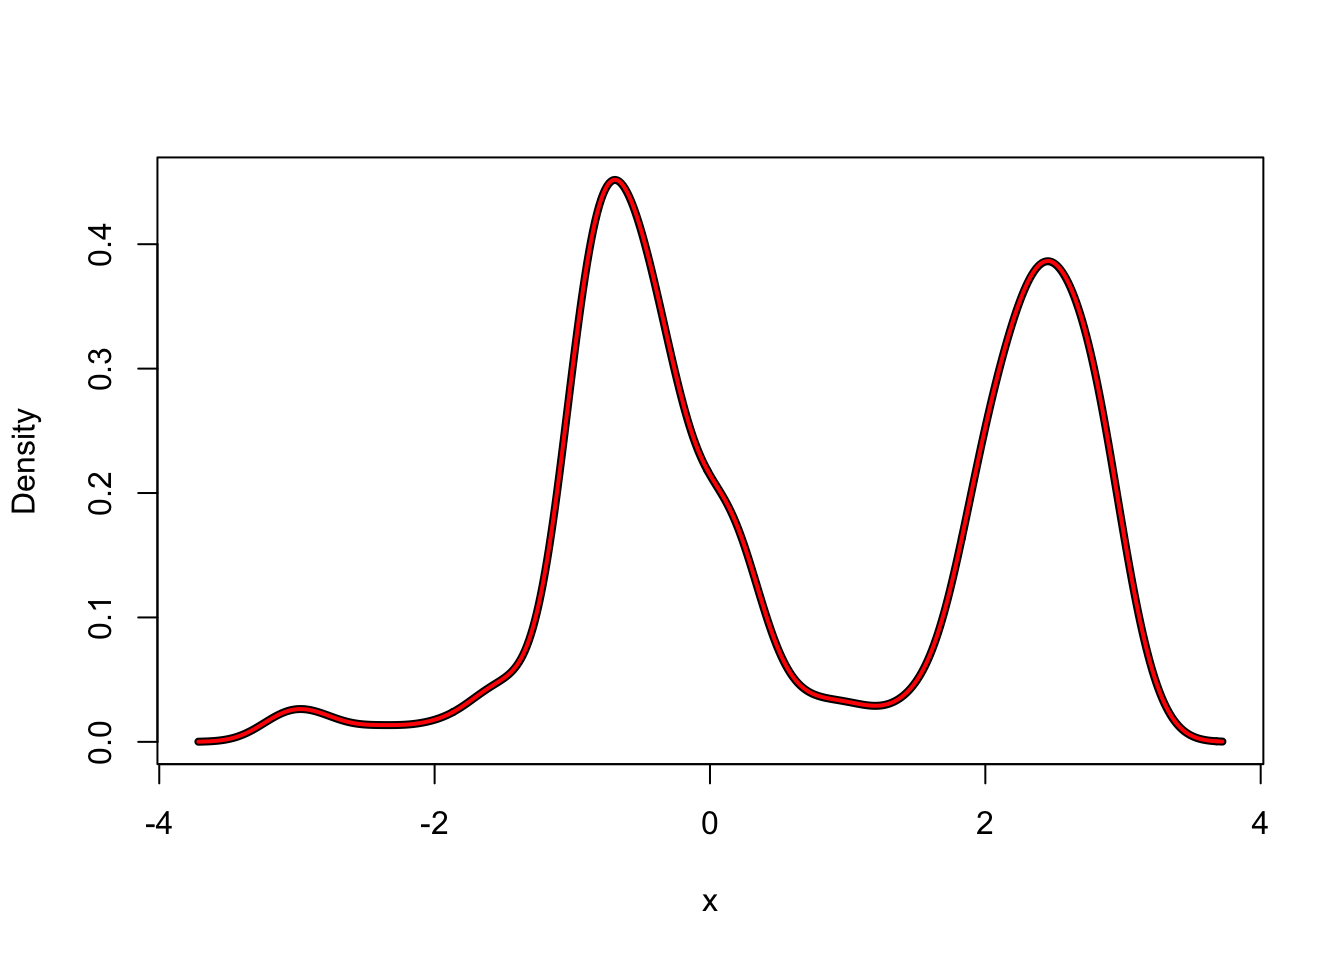 Kernel density estimates with the Gaussian kernel (left) using R's implementation (black) and our implementation (red) together with differences of the estimates (right).